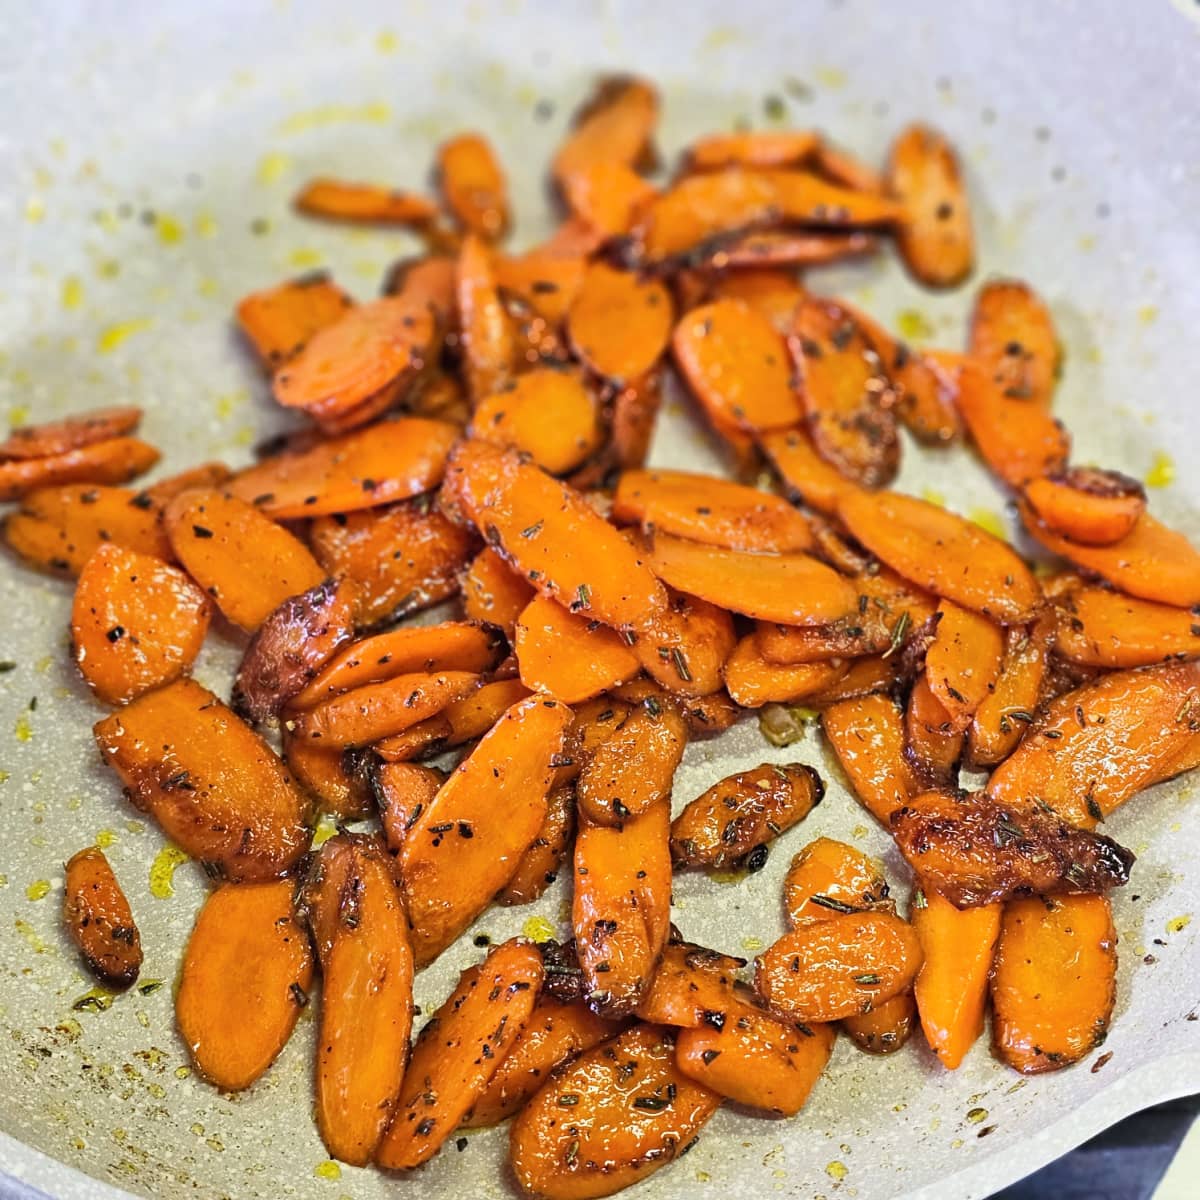 Sliced carrots in a light colored skillet